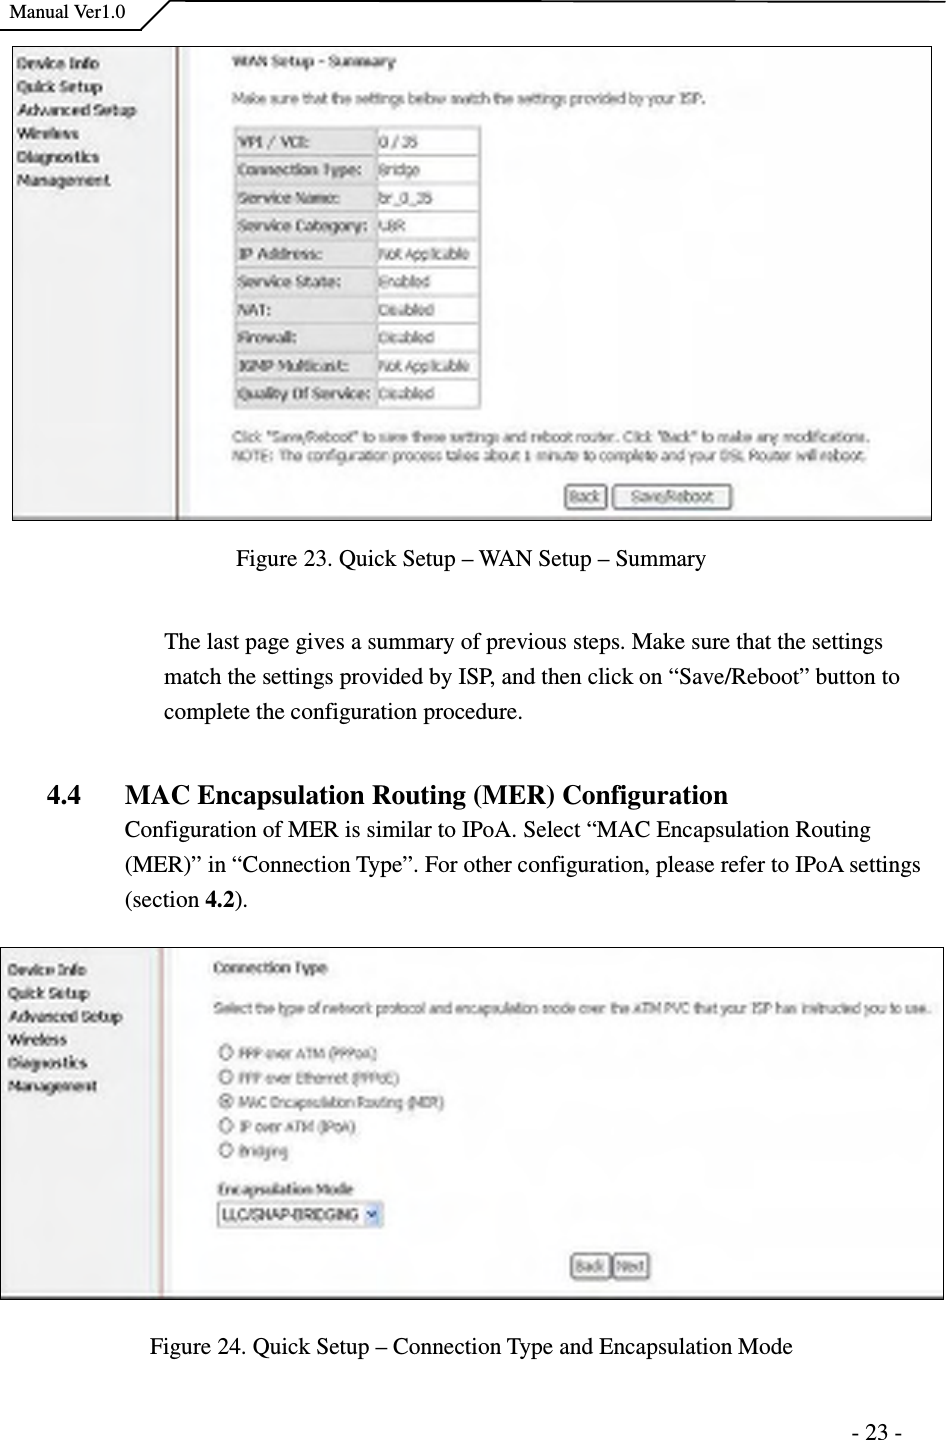    Manual Ver1.0                                                                      - 23 -  Figure 23. Quick Setup – WAN Setup – Summary  The last page gives a summary of previous steps. Make sure that the settings match the settings provided by ISP, and then click on “Save/Reboot” button to complete the configuration procedure.  4.4 MAC Encapsulation Routing (MER) Configuration Configuration of MER is similar to IPoA. Select “MAC Encapsulation Routing (MER)” in “Connection Type”. For other configuration, please refer to IPoA settings (section 4.2).  Figure 24. Quick Setup – Connection Type and Encapsulation Mode 